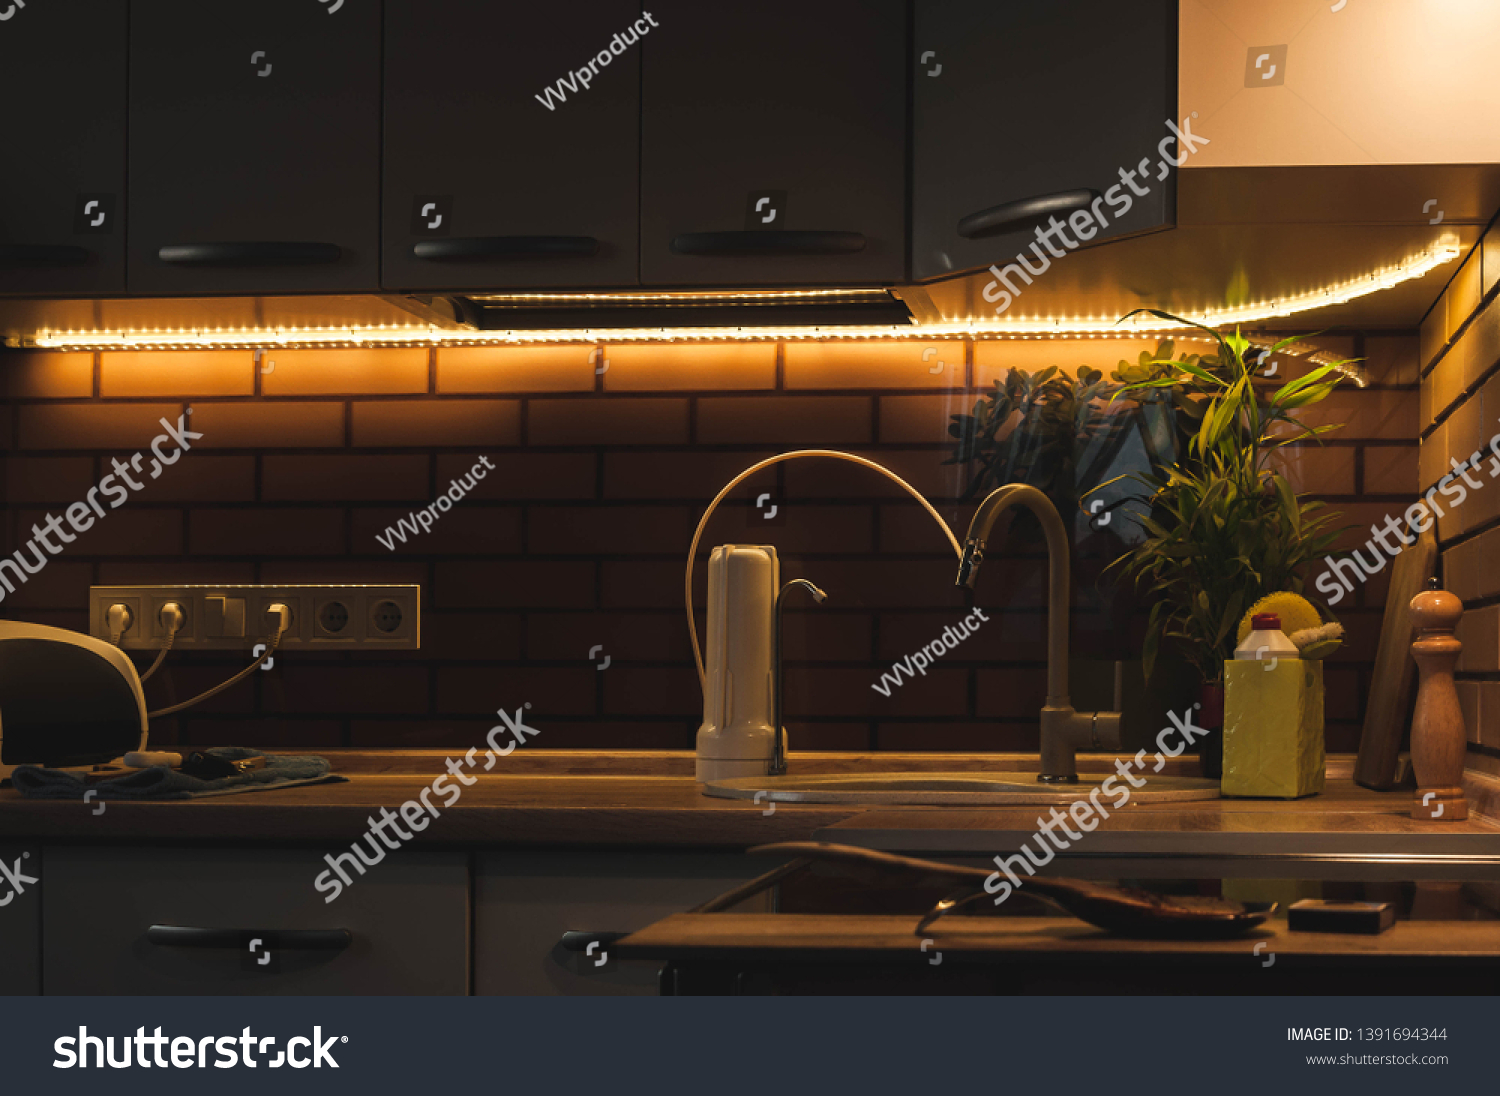 Evening life in a country house in the kitchen with a pleasant warm lighting. Modern interior compact kitchen. LED strip with base. Portable drinking water filter with replaceable cartridges. #1391694344